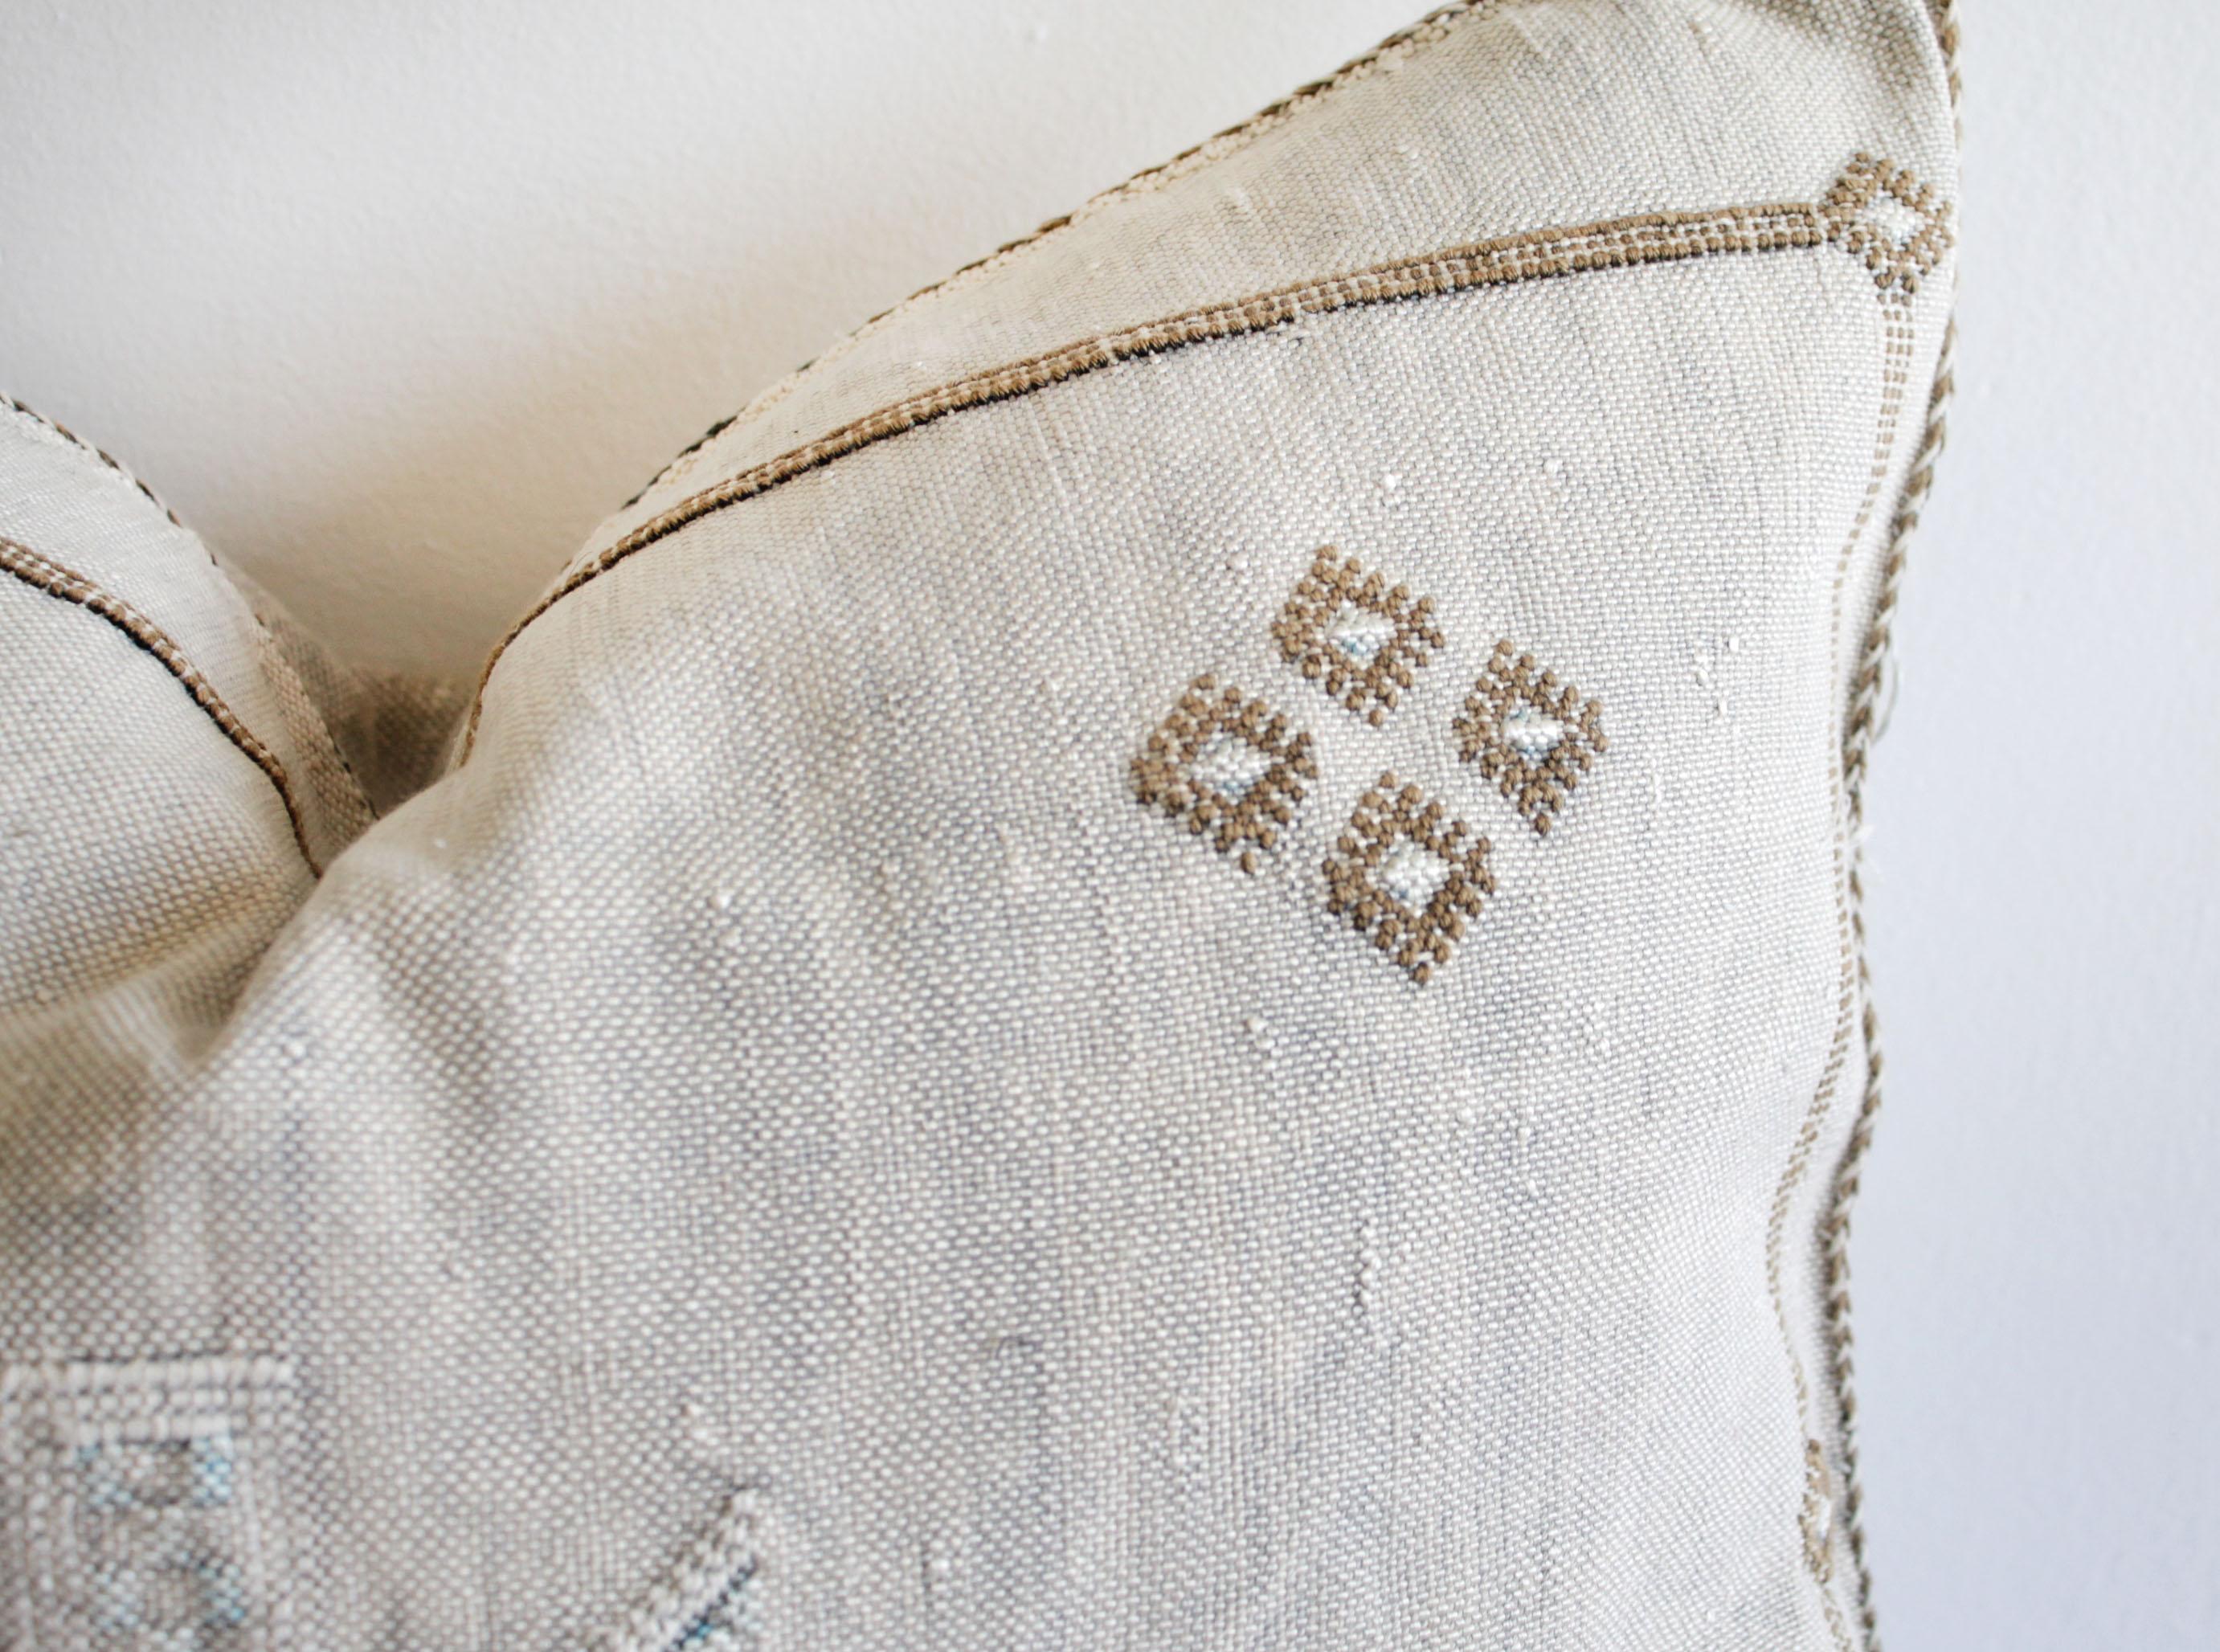 Moroccan handwoven cactus silk pillow as shown with a beautiful light gray tone background, and white, with golden brown accents, backside is the same plain cactus silk with no embroidery.
Limited quantities available as these are 1 of a kind. Does